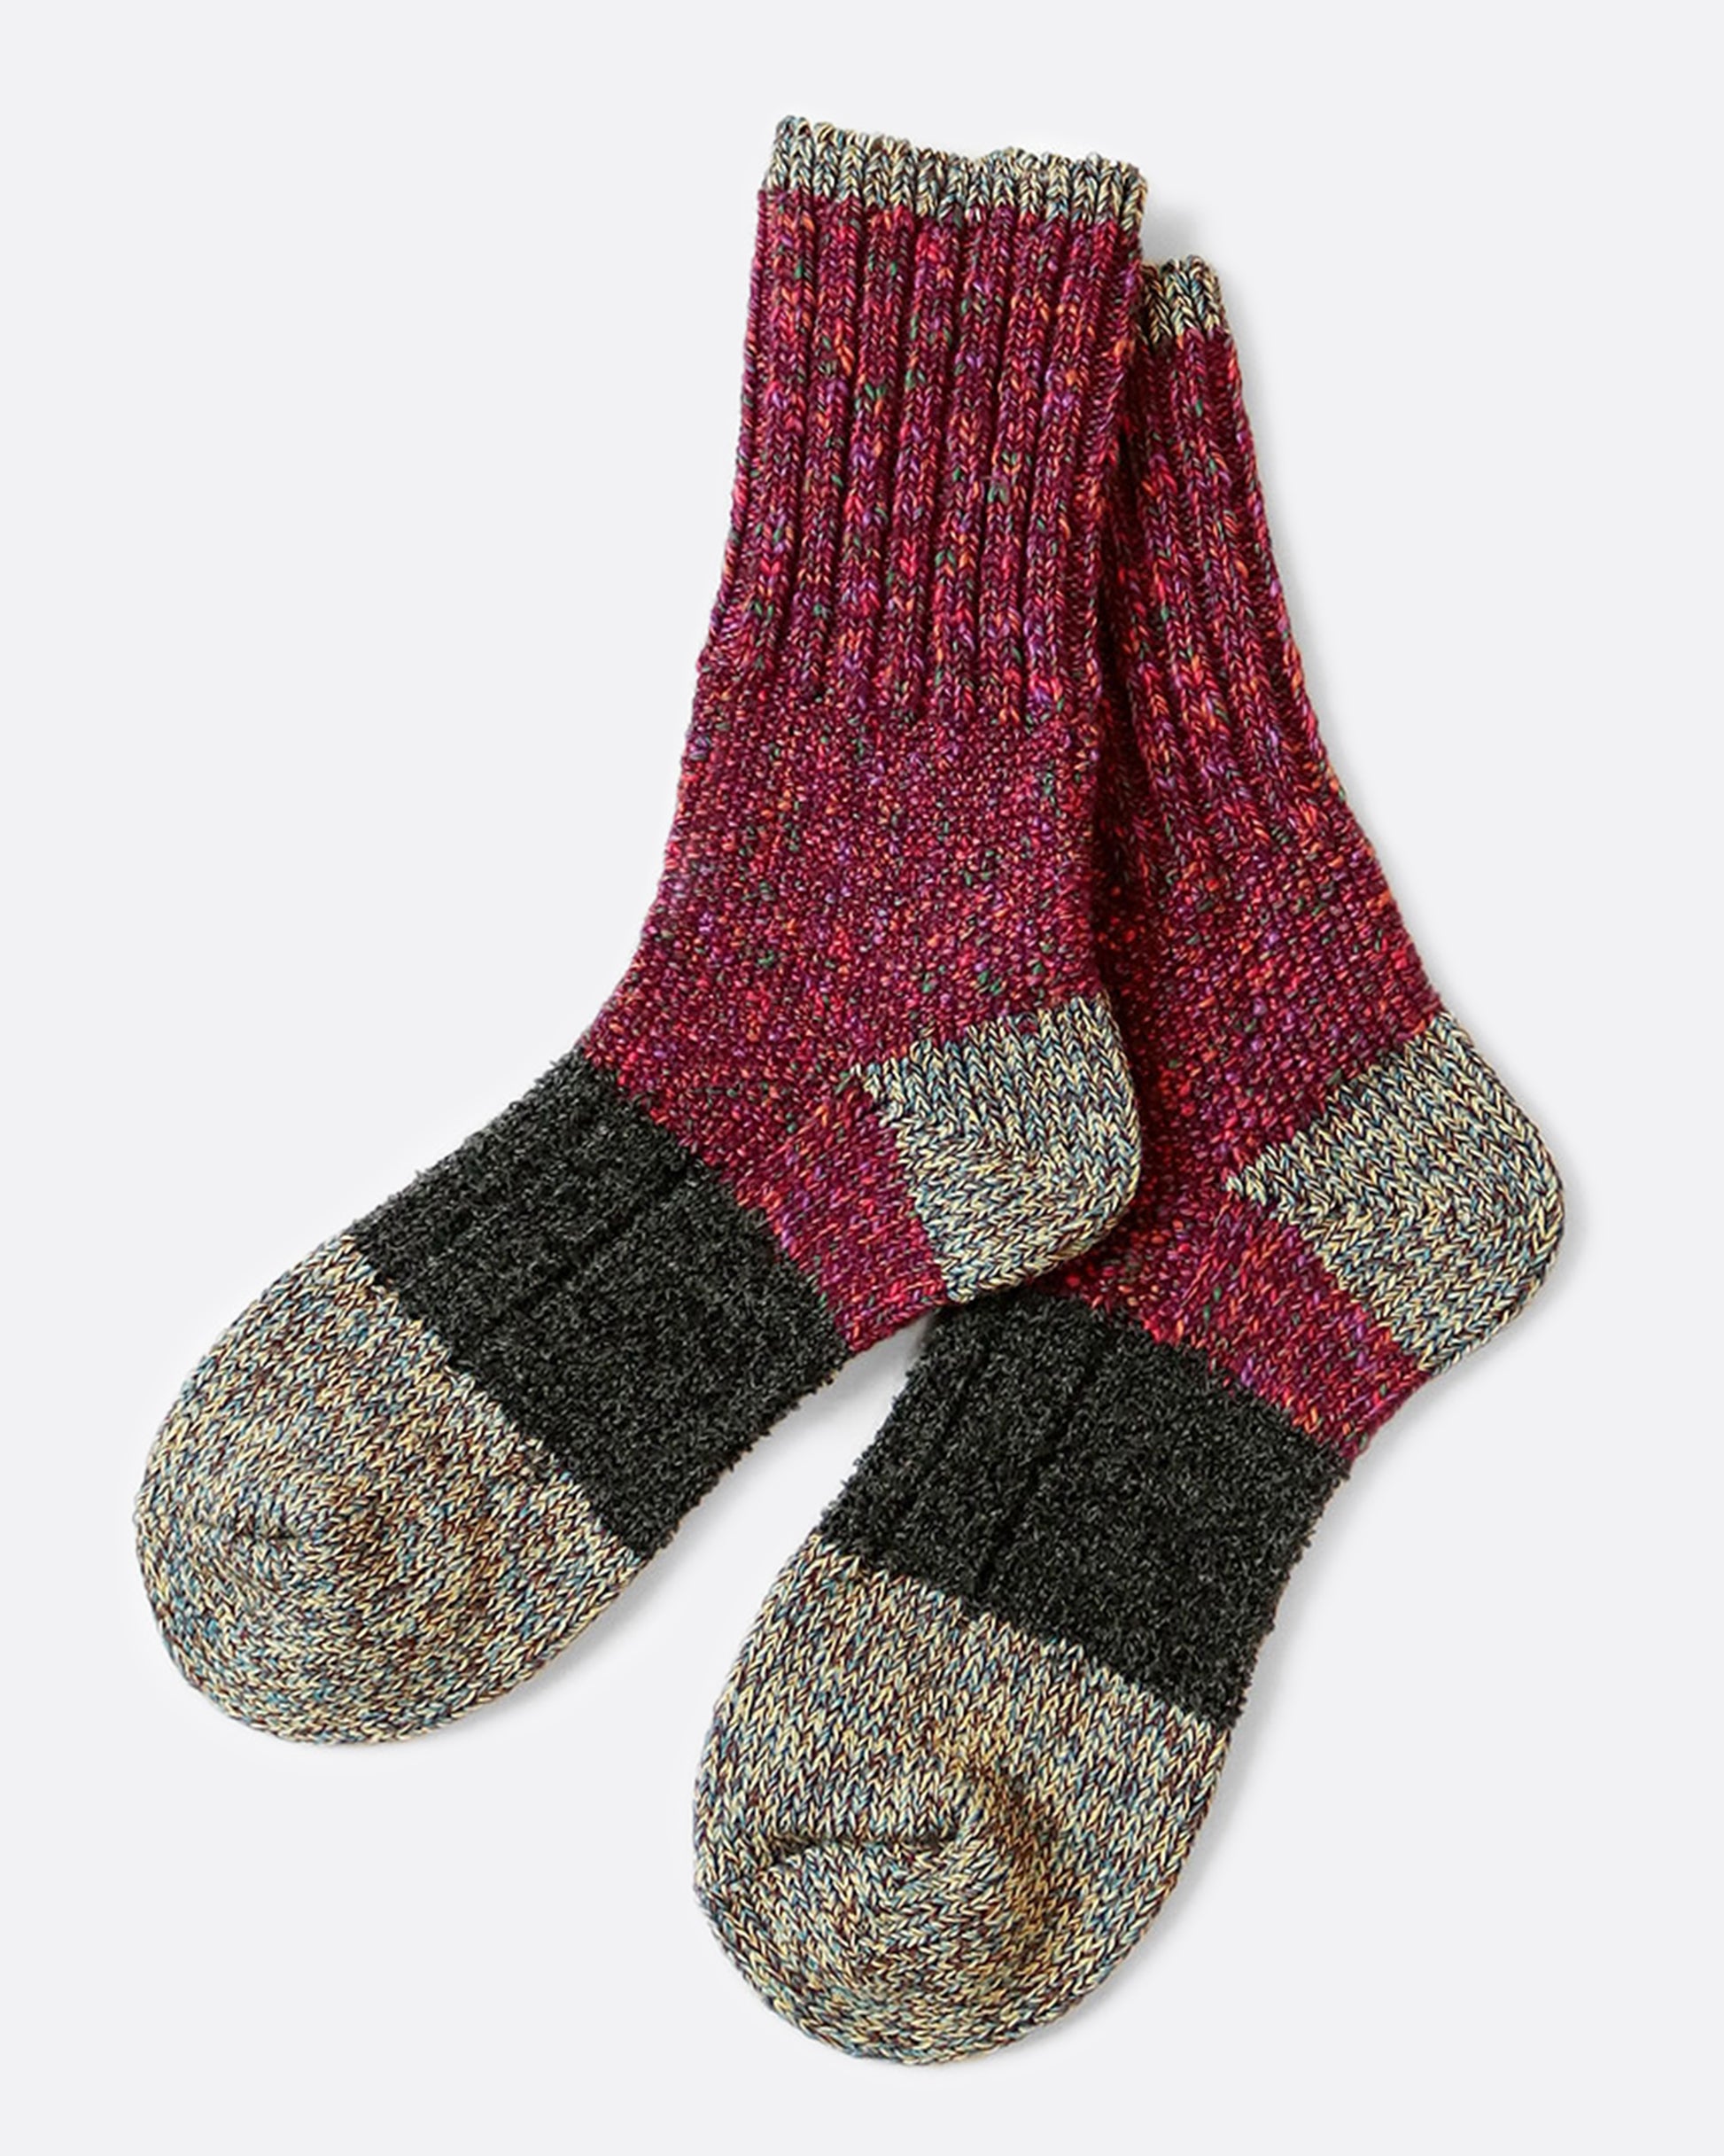 These socks combine three different textures to create a pair with just the right amount of hold and stretch.